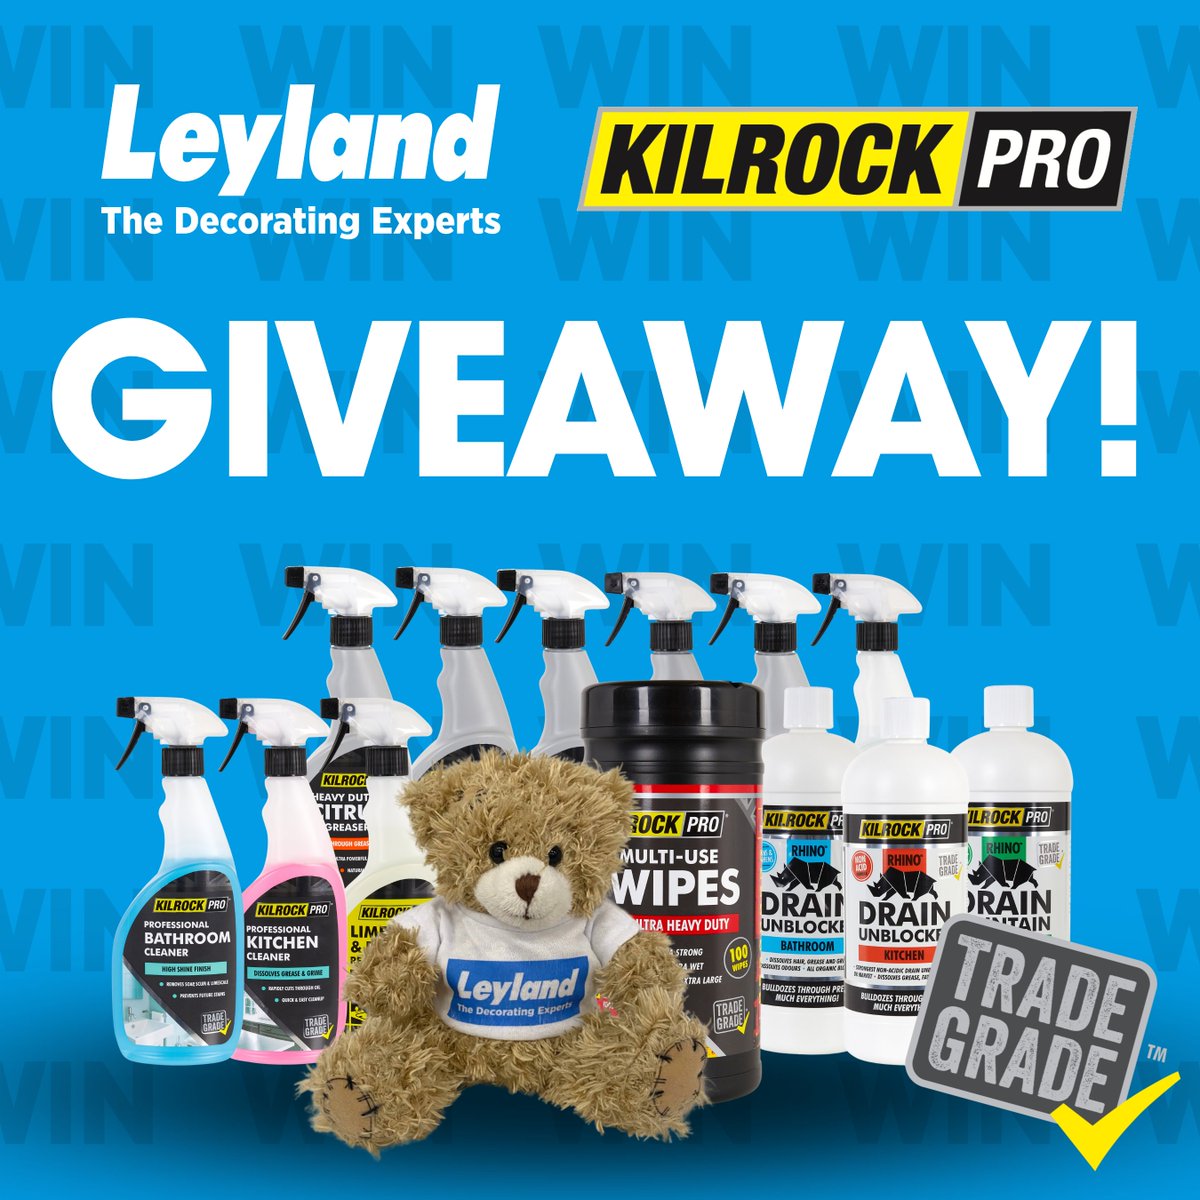 We've teamed up with KilrockPRO for the ULTIMATE Easter spring clean giveaway! 🧽 With a total of 13 products in one bundle, to enter simply: 💙 Like this post 💙 Comment below using the sponge '🧽' emoji 💙 Be sure to follow us T&C's apply* bit.ly/4ctPOJL